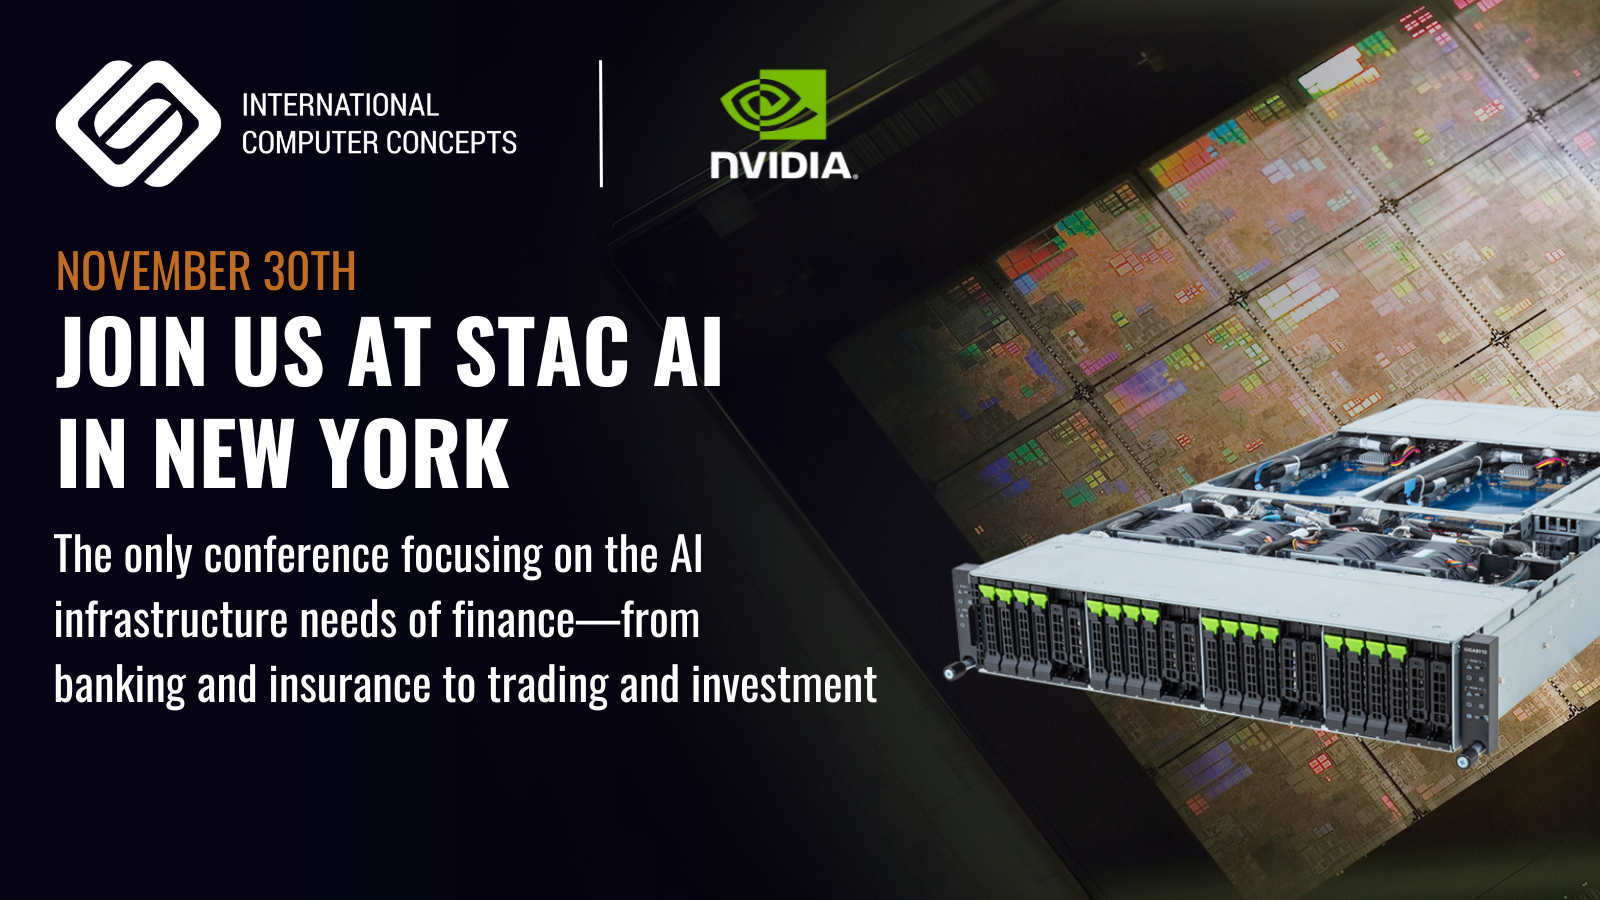 Join us at STAC AI